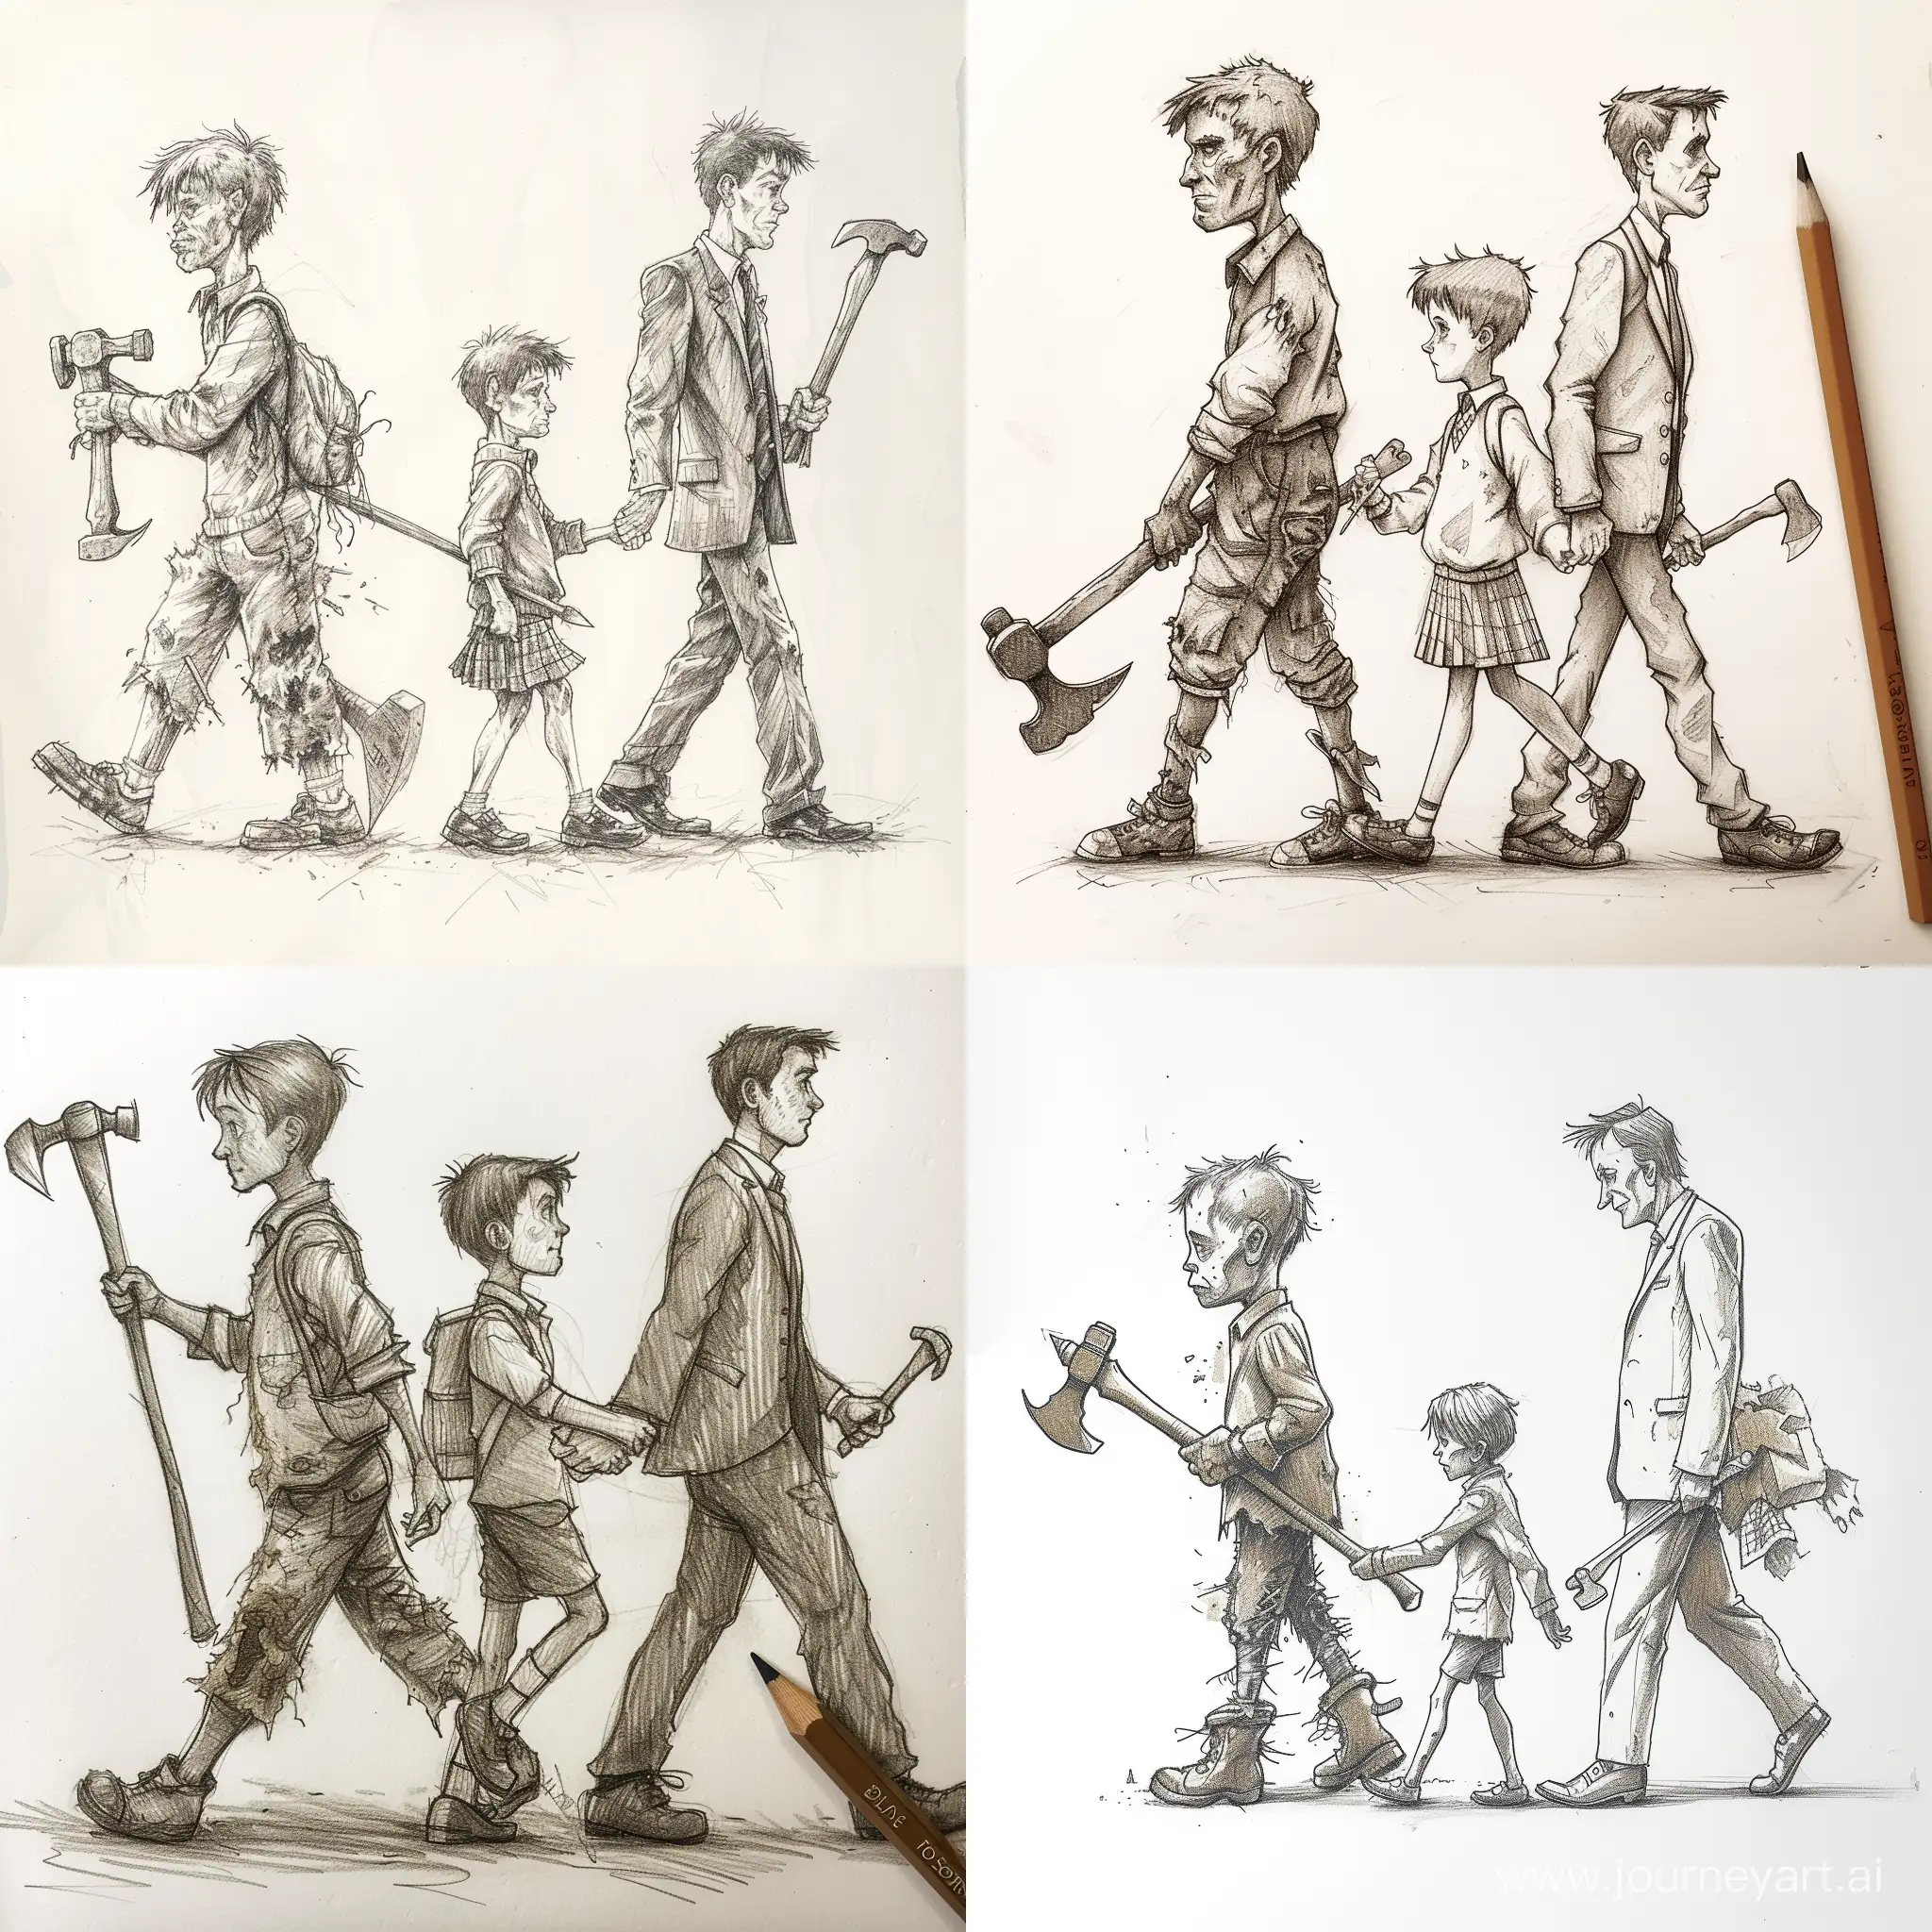 Contrasting-Paths-Poor-Boy-with-Tools-Rich-Schoolboy-with-Guardian